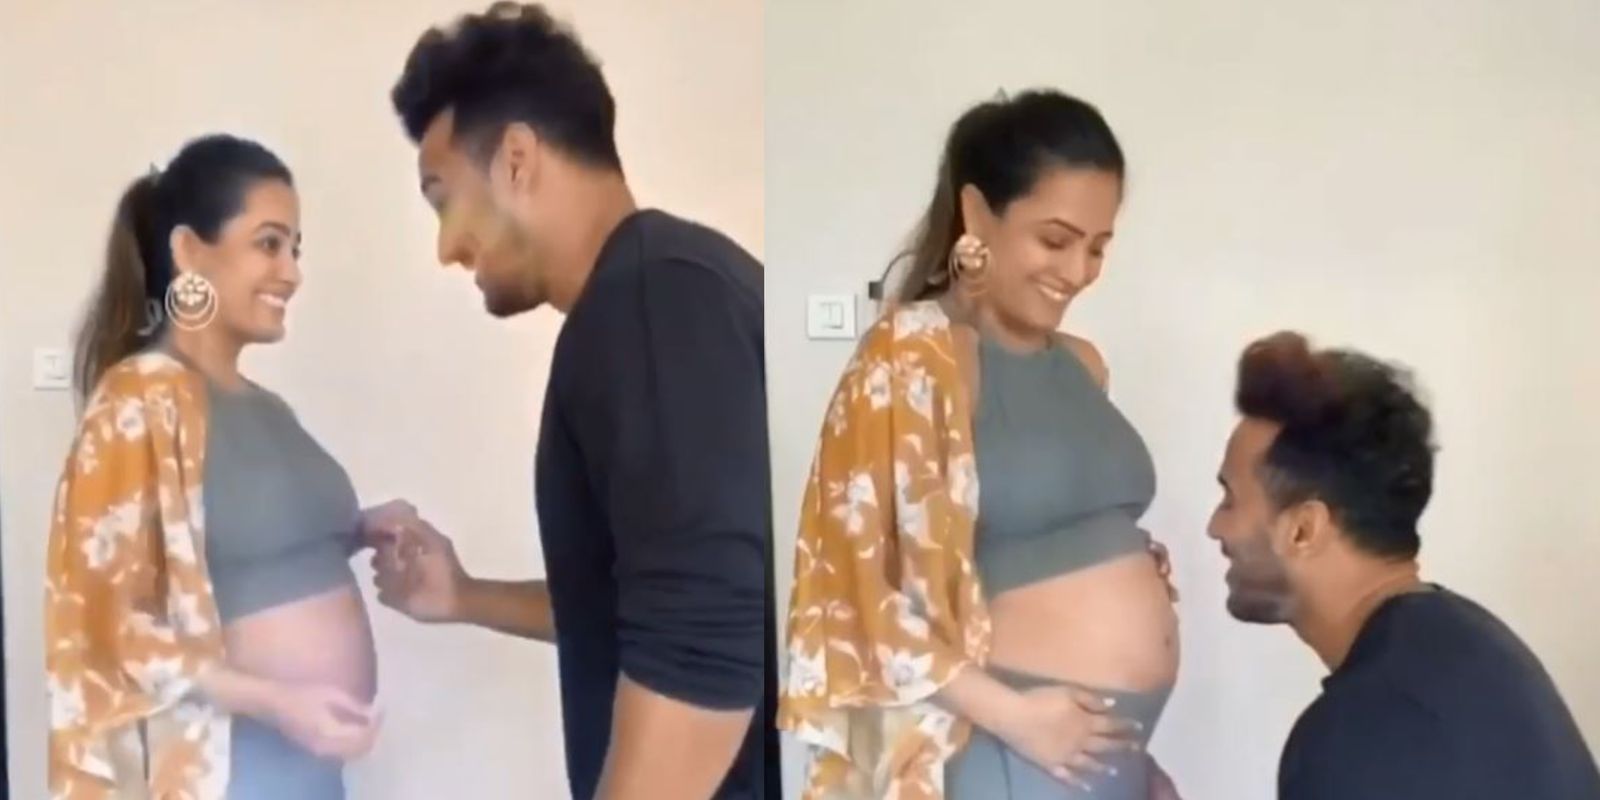 Anita Hassanandani And Husband Rohit Reddy Expecting Their First Child; Former Shares A Video Of The 'Big Reveal'